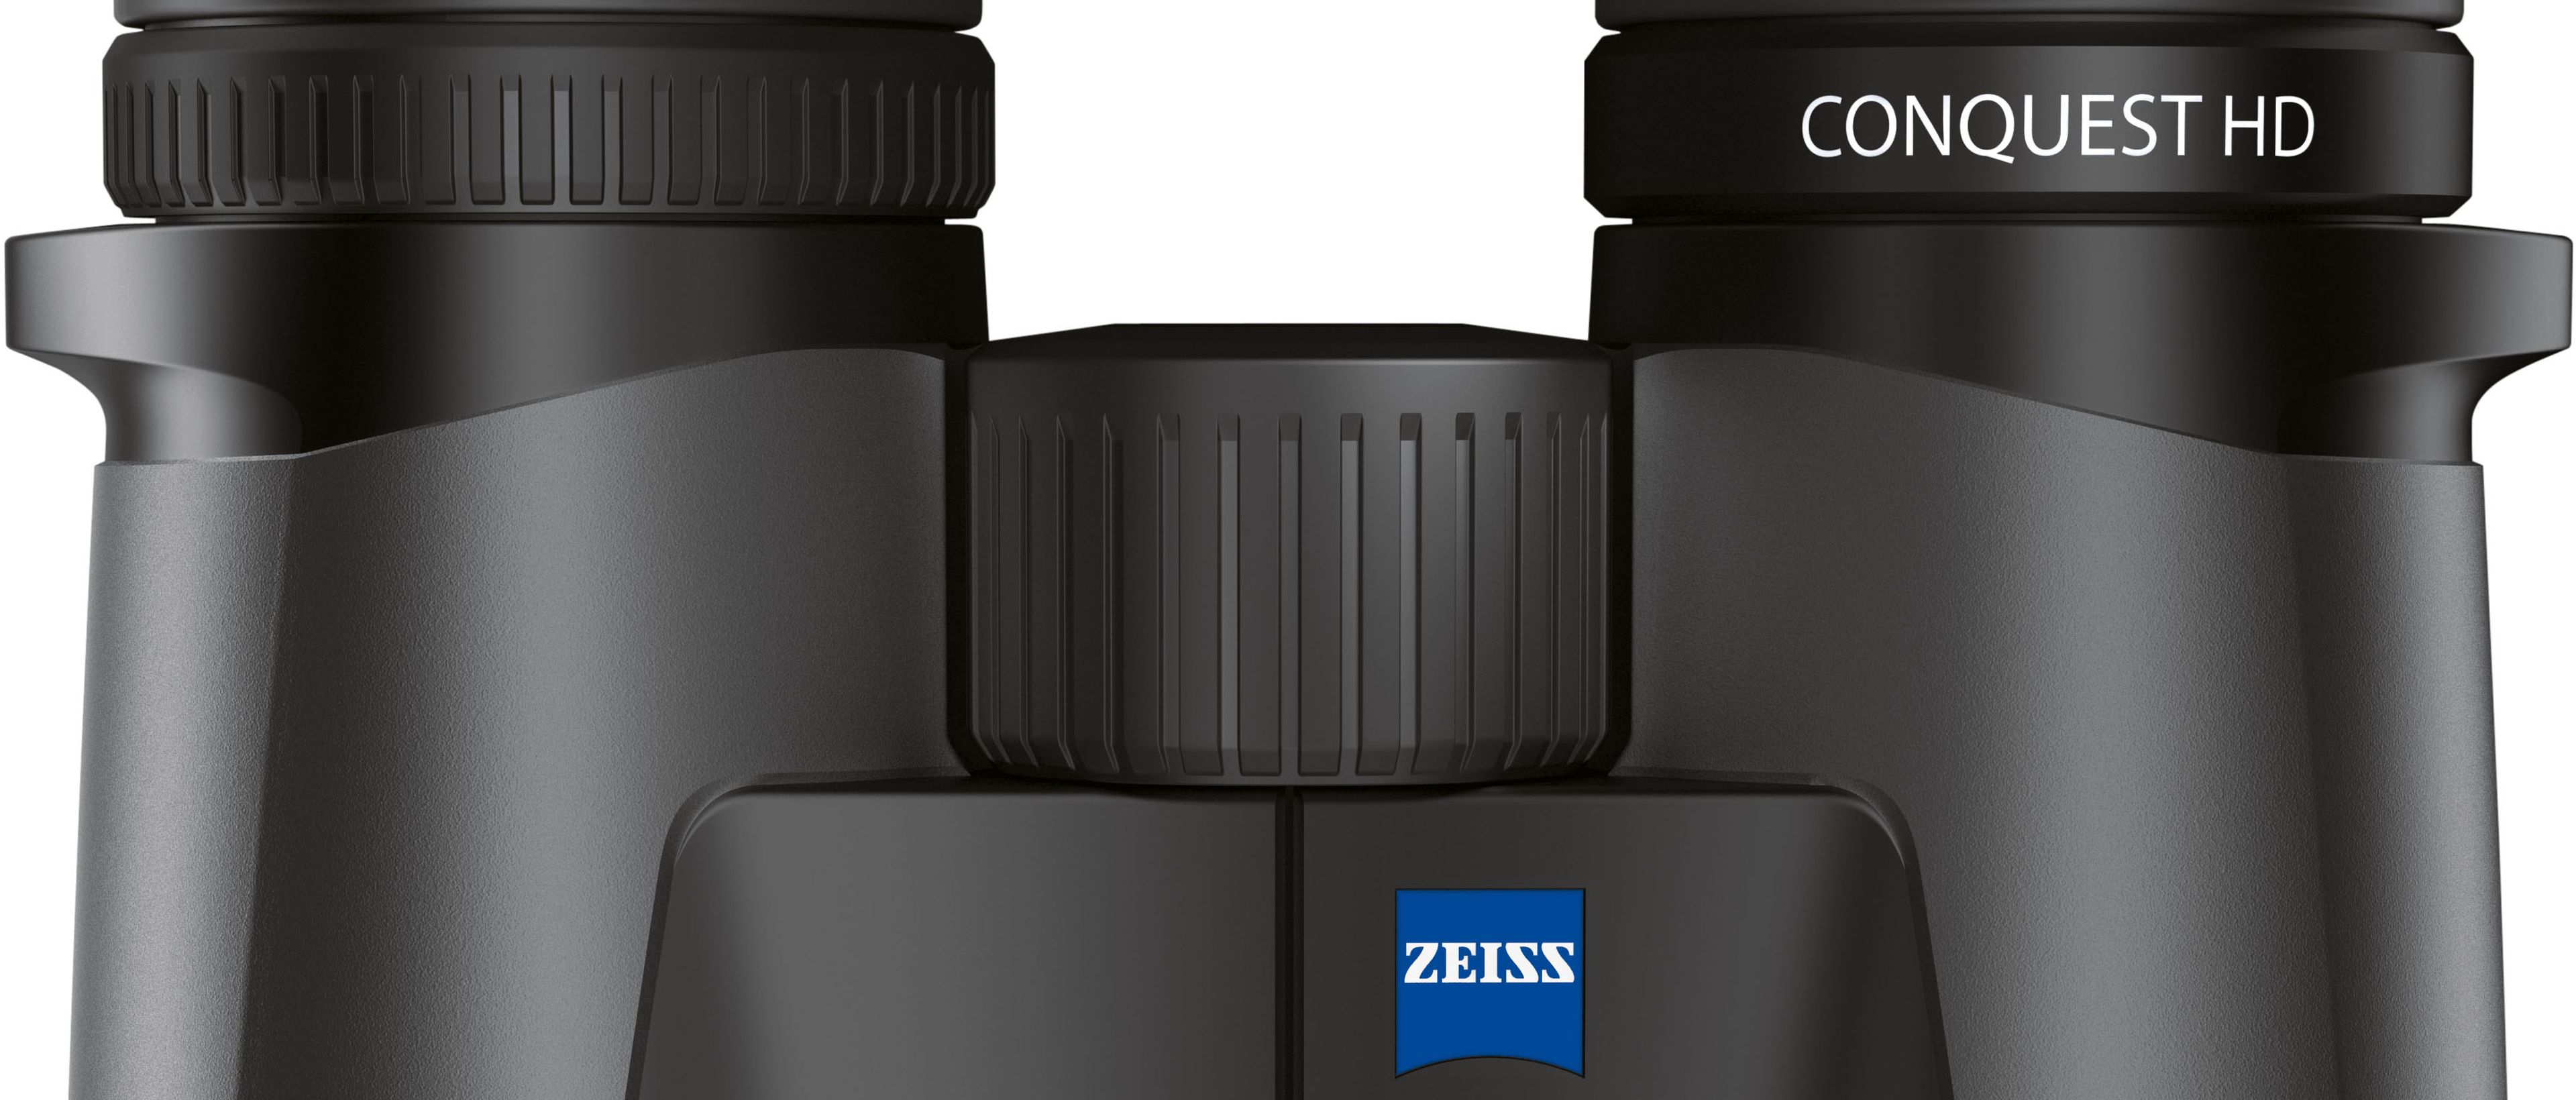 Preview Image: ZEISS Conquest HD 10×42